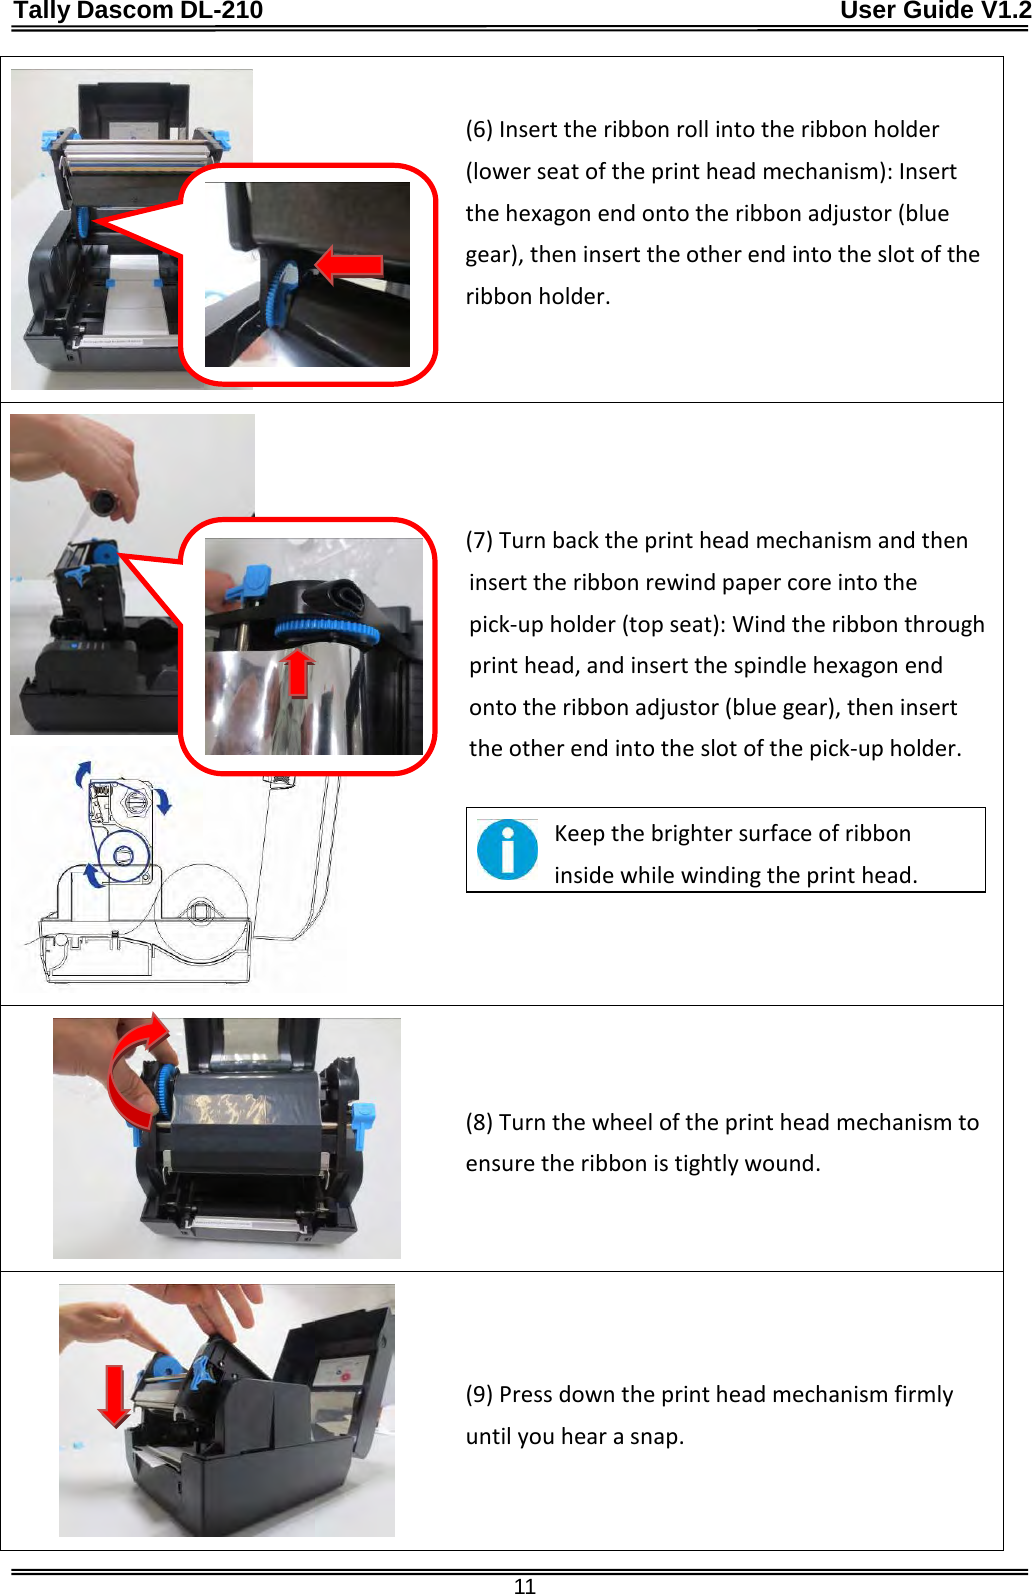 Tally Dascom DL-210                                              User Guide V1.2  11  (6) Insert the ribbon roll into the ribbon holder (lower seat of the print head mechanism): Insert the hexagon end onto the ribbon adjustor (blue gear), then insert the other end into the slot of the ribbon holder.      (7) Turn back the print head mechanism and then insert the ribbon rewind paper core into the pick-up holder (top seat): Wind the ribbon through print head, and insert the spindle hexagon end onto the ribbon adjustor (blue gear), then insert the other end into the slot of the pick-up holder.   Keep the brighter surface of ribbon inside while winding the print head.   (8) Turn the wheel of the print head mechanism to ensure the ribbon is tightly wound.  (9) Press down the print head mechanism firmly until you hear a snap.   